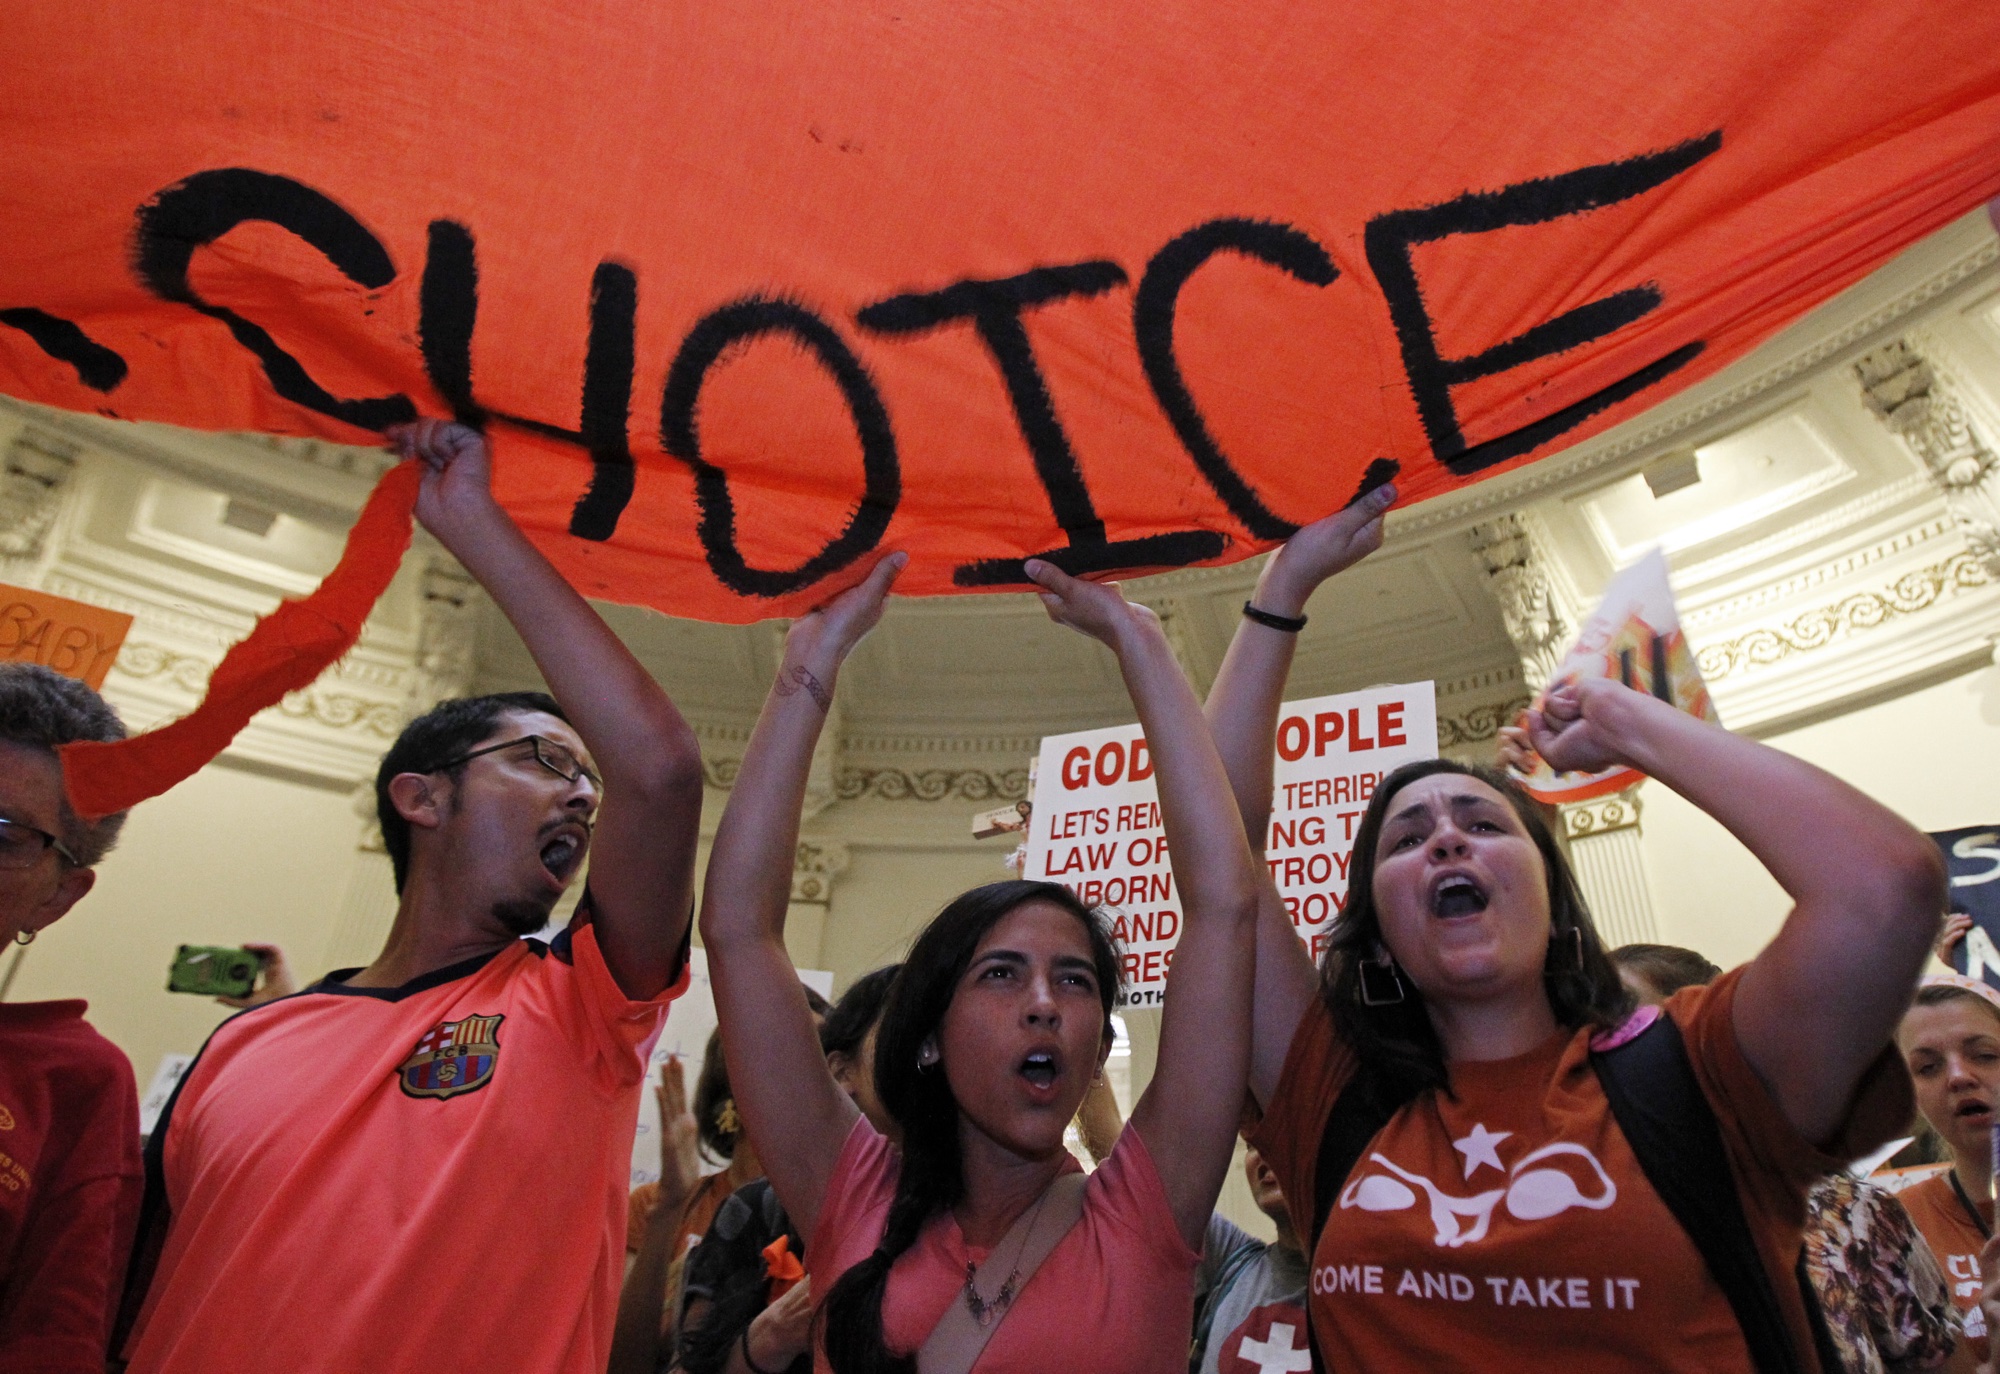 Protesters rally in the rotunda of the State Capitol in Austin, Texas July 12, 2013. REUTERS/Mike Stone